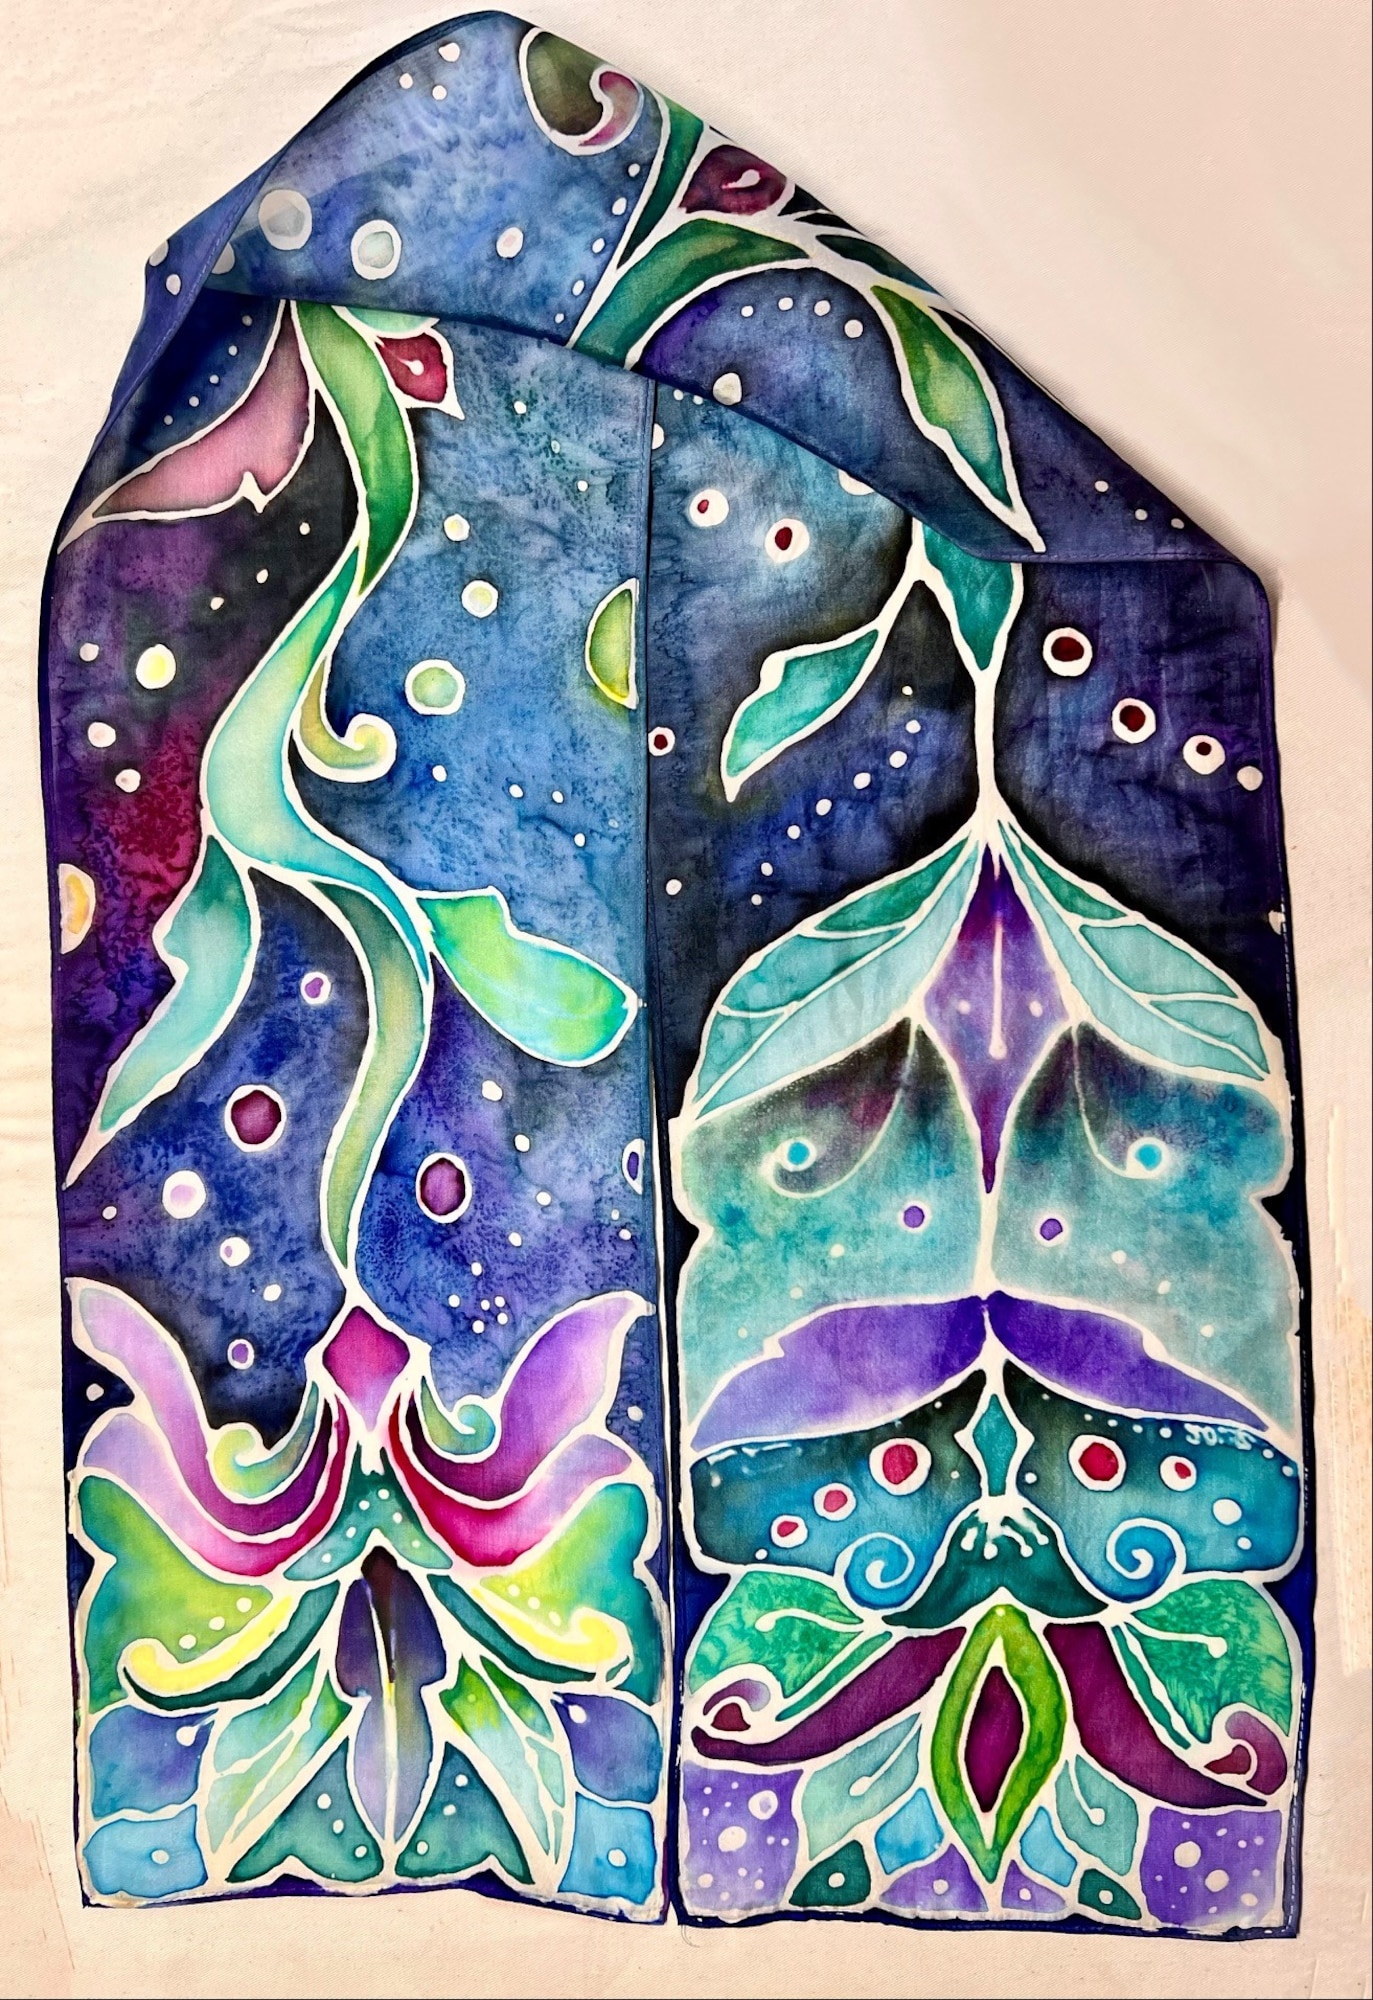 Ms. Linda Zorichak's painted scarf titled "Royal Space" that won first place in the “Adult, Accomplished, 3D” category in the 2023 Air Force Art Contest. (Courtesy photo)